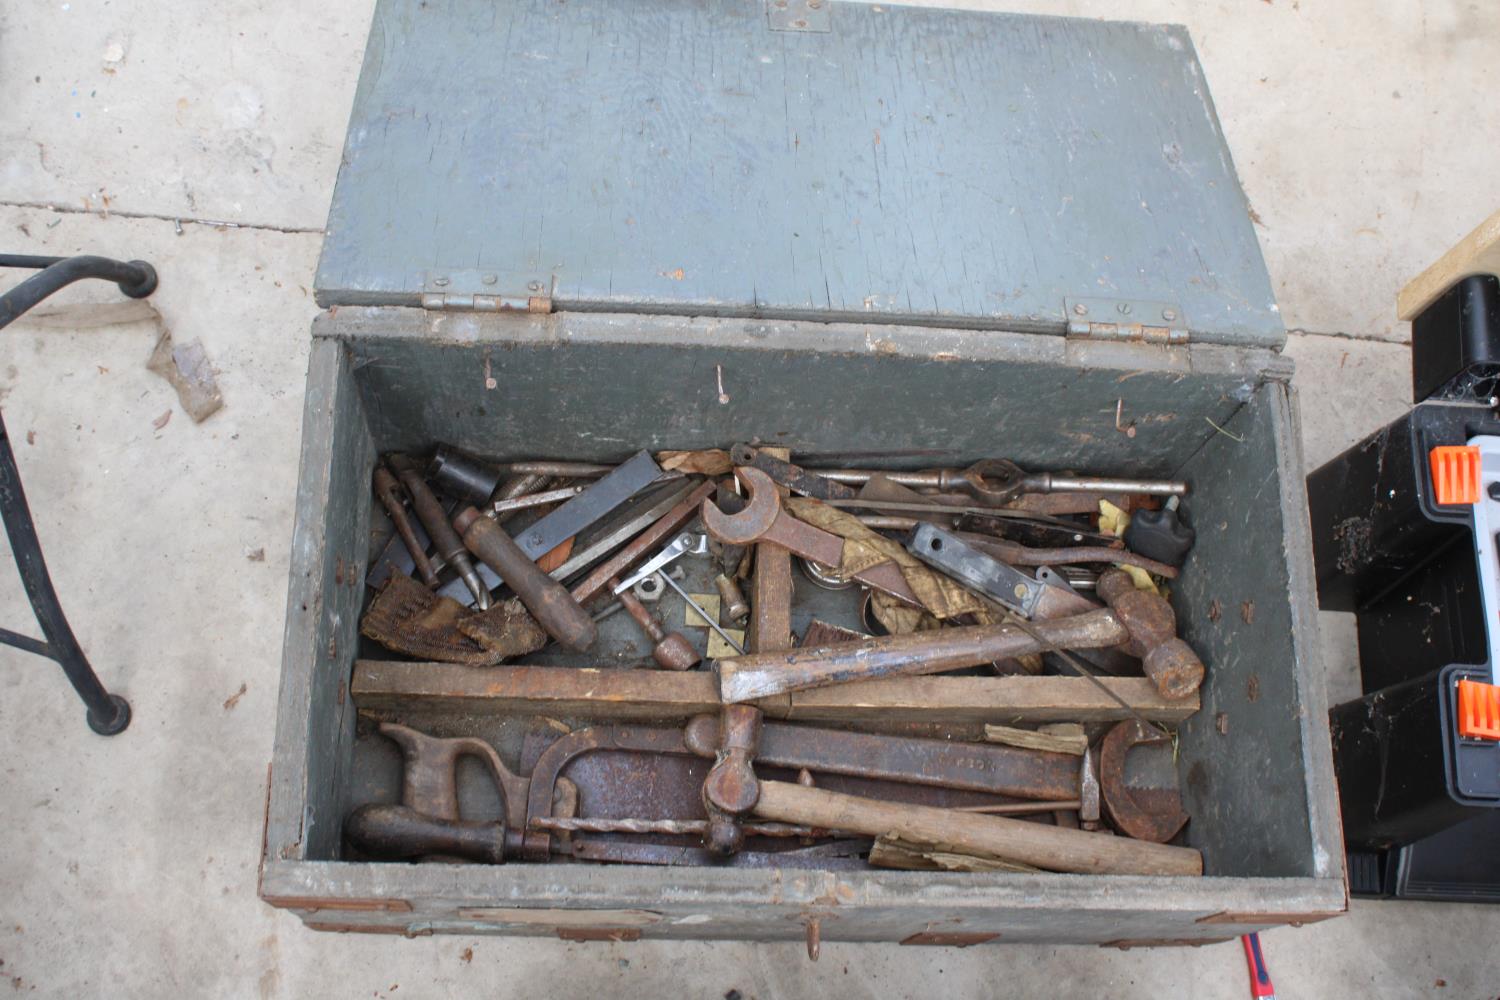 TWO VINTAGE WOODEN TOOL CHESTS WITH AN ASSORTMENT OF TOOLS TO INCLUDE HAMMERS AND SPANNERS ETC - Image 4 of 4